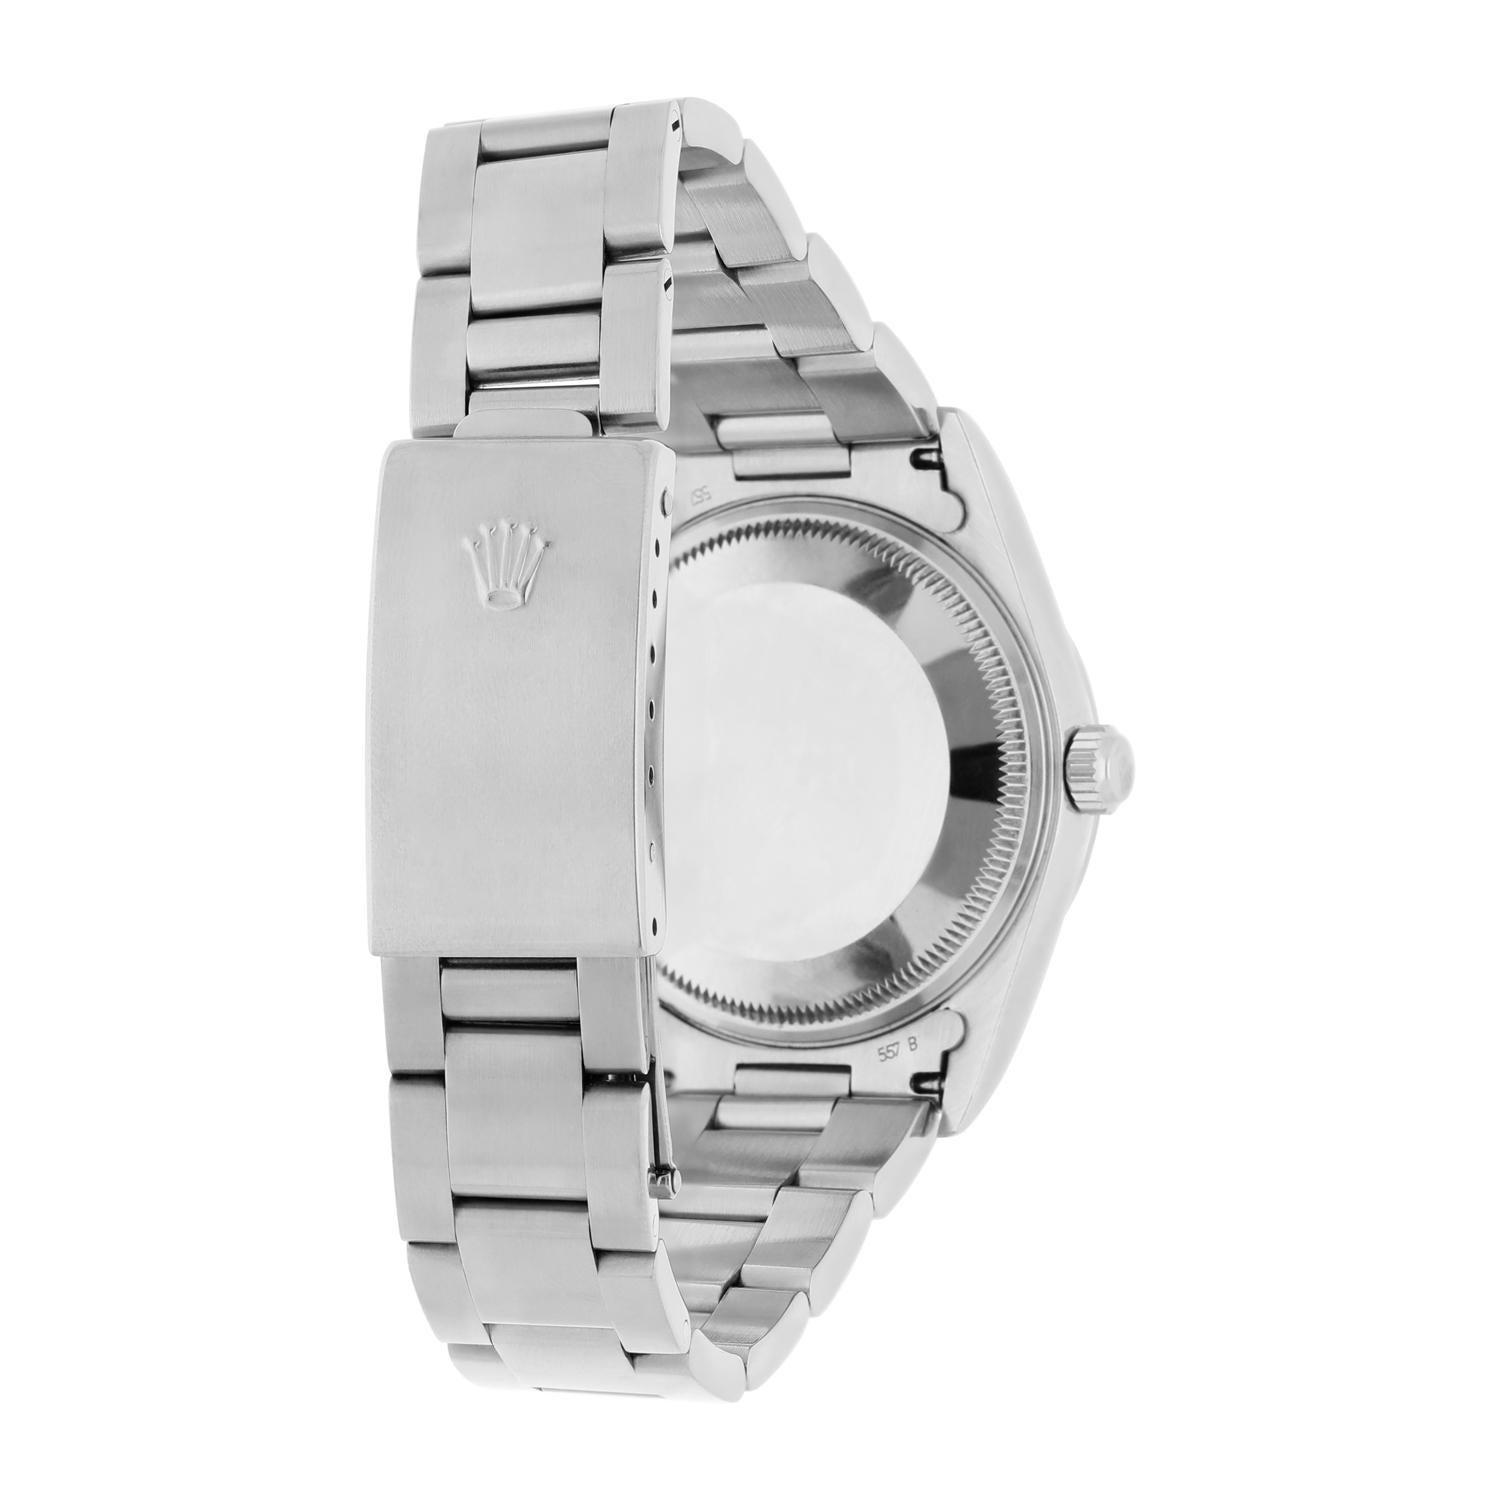 Rolex Date 34mm Stainless Steel Watch Oyster Band Silver Dial Circa 2001 15200 en vente 3